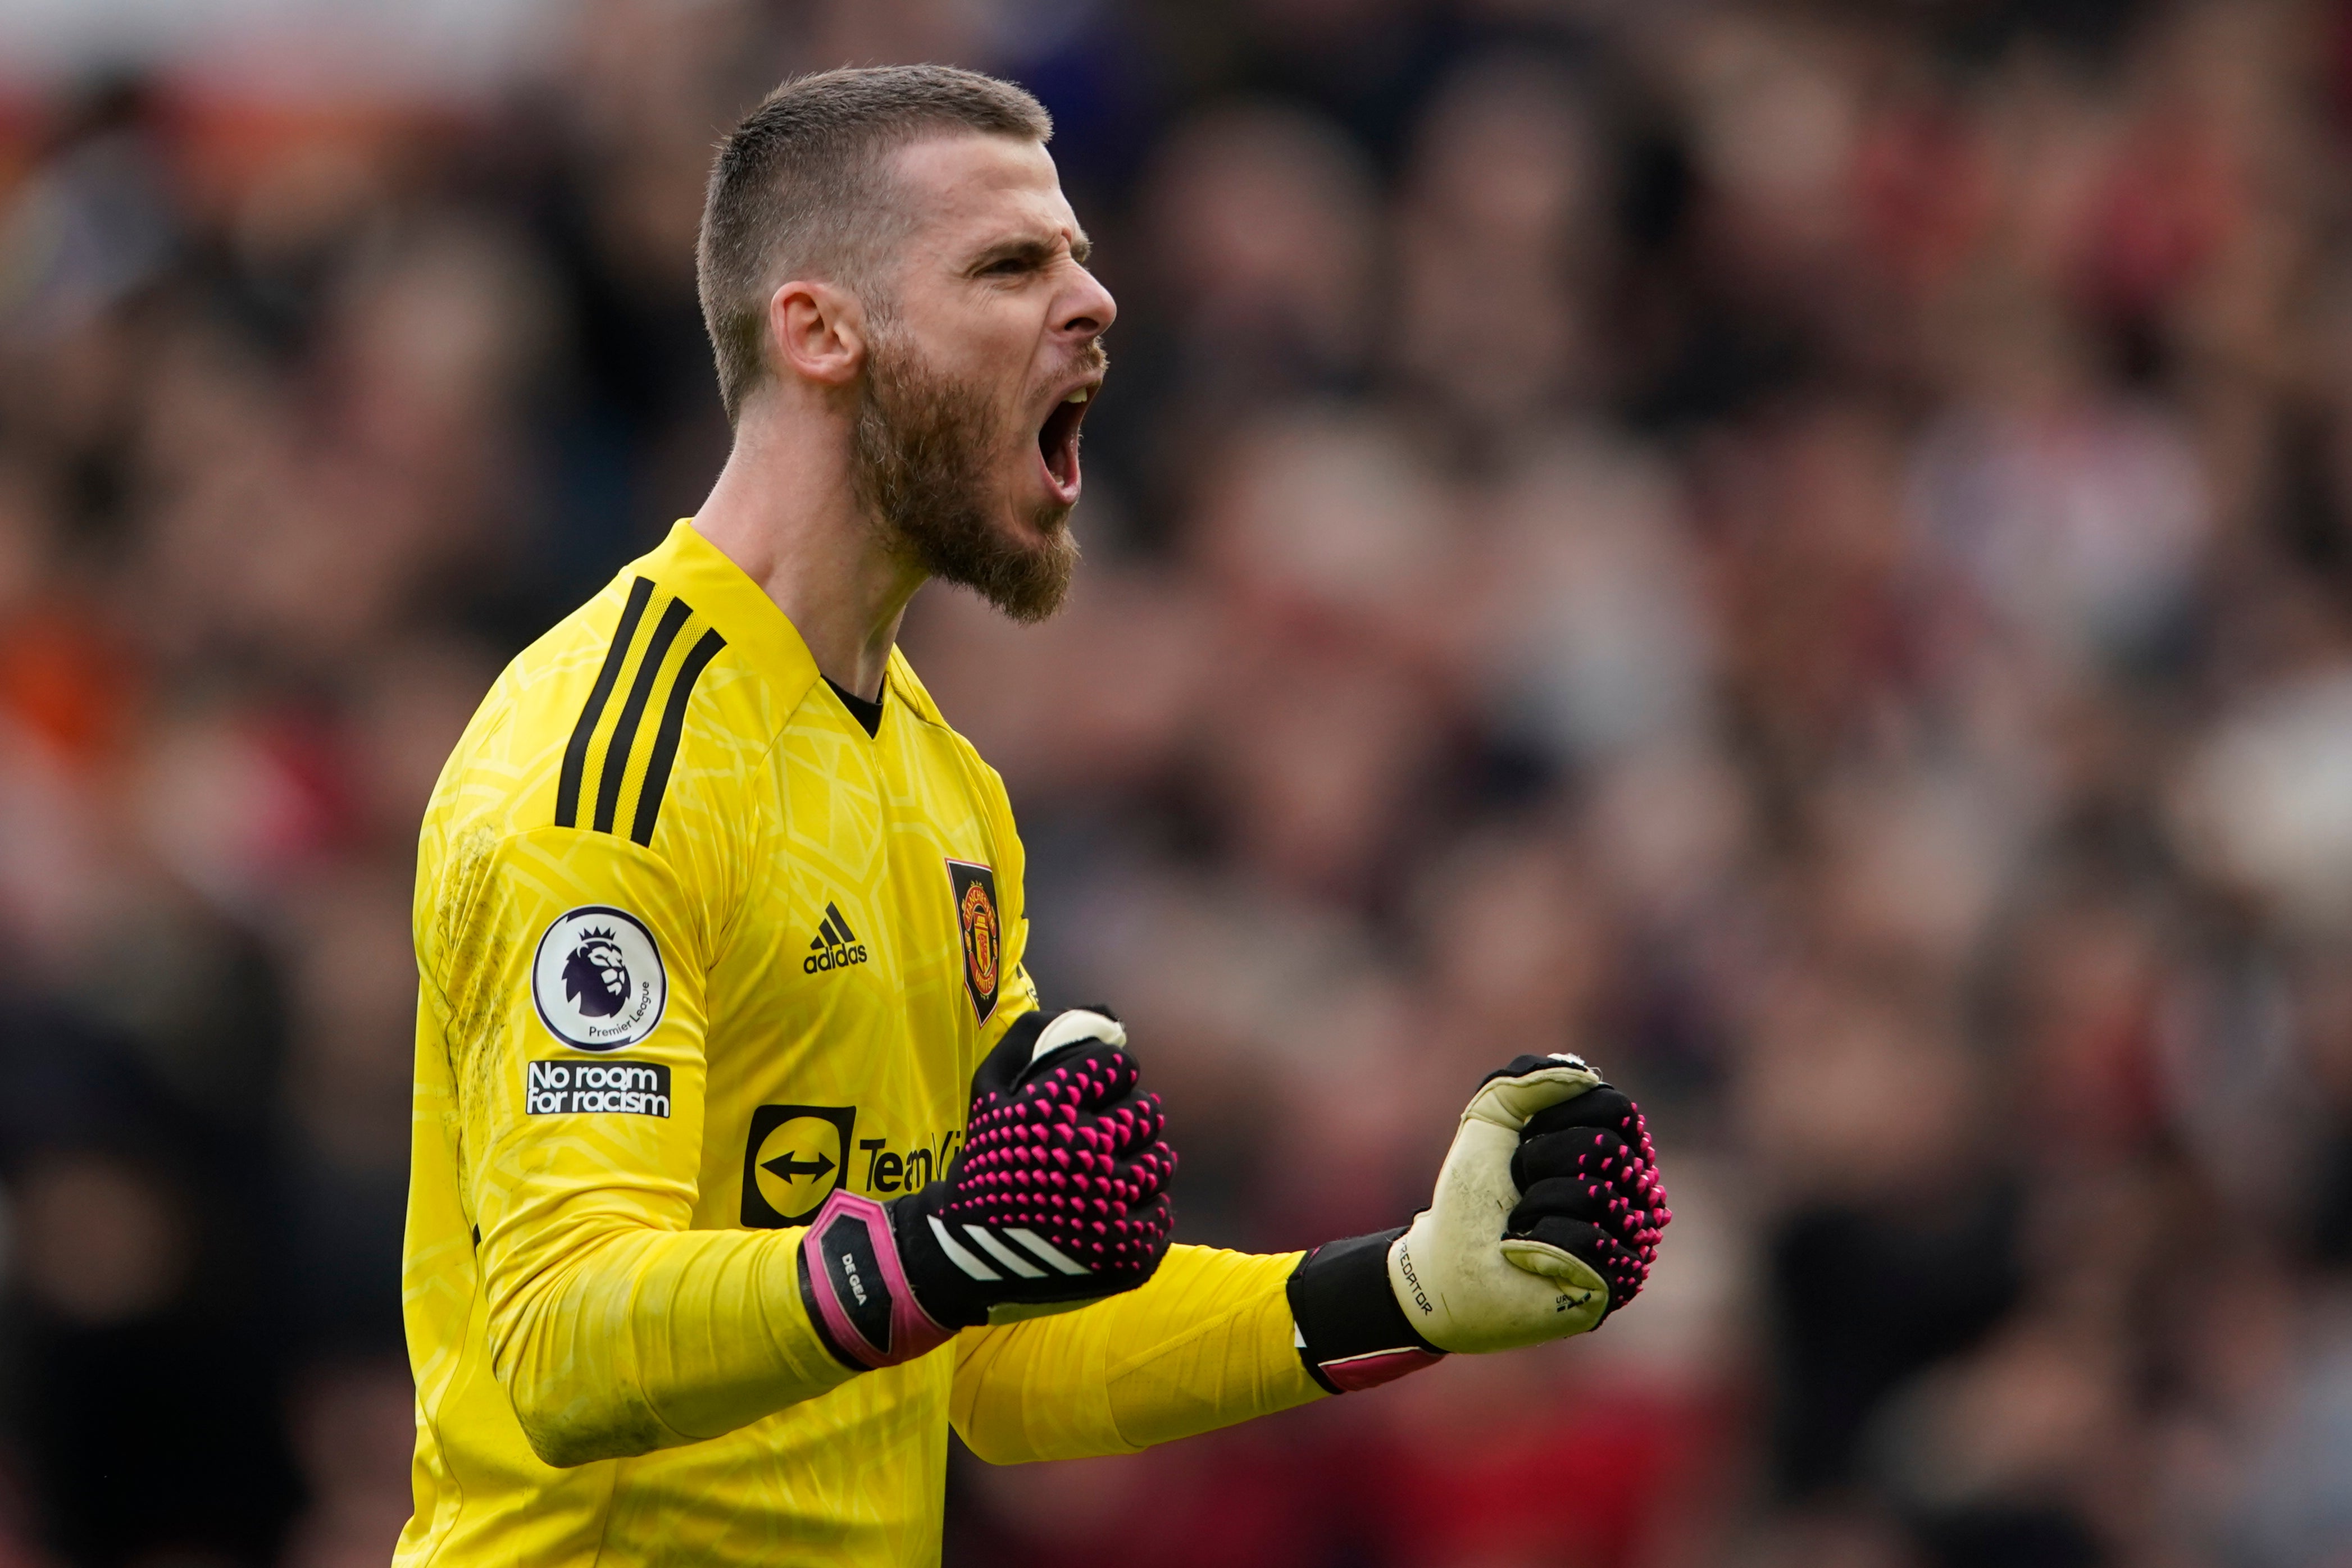 David de Gea spectacularly saved twice in the first half